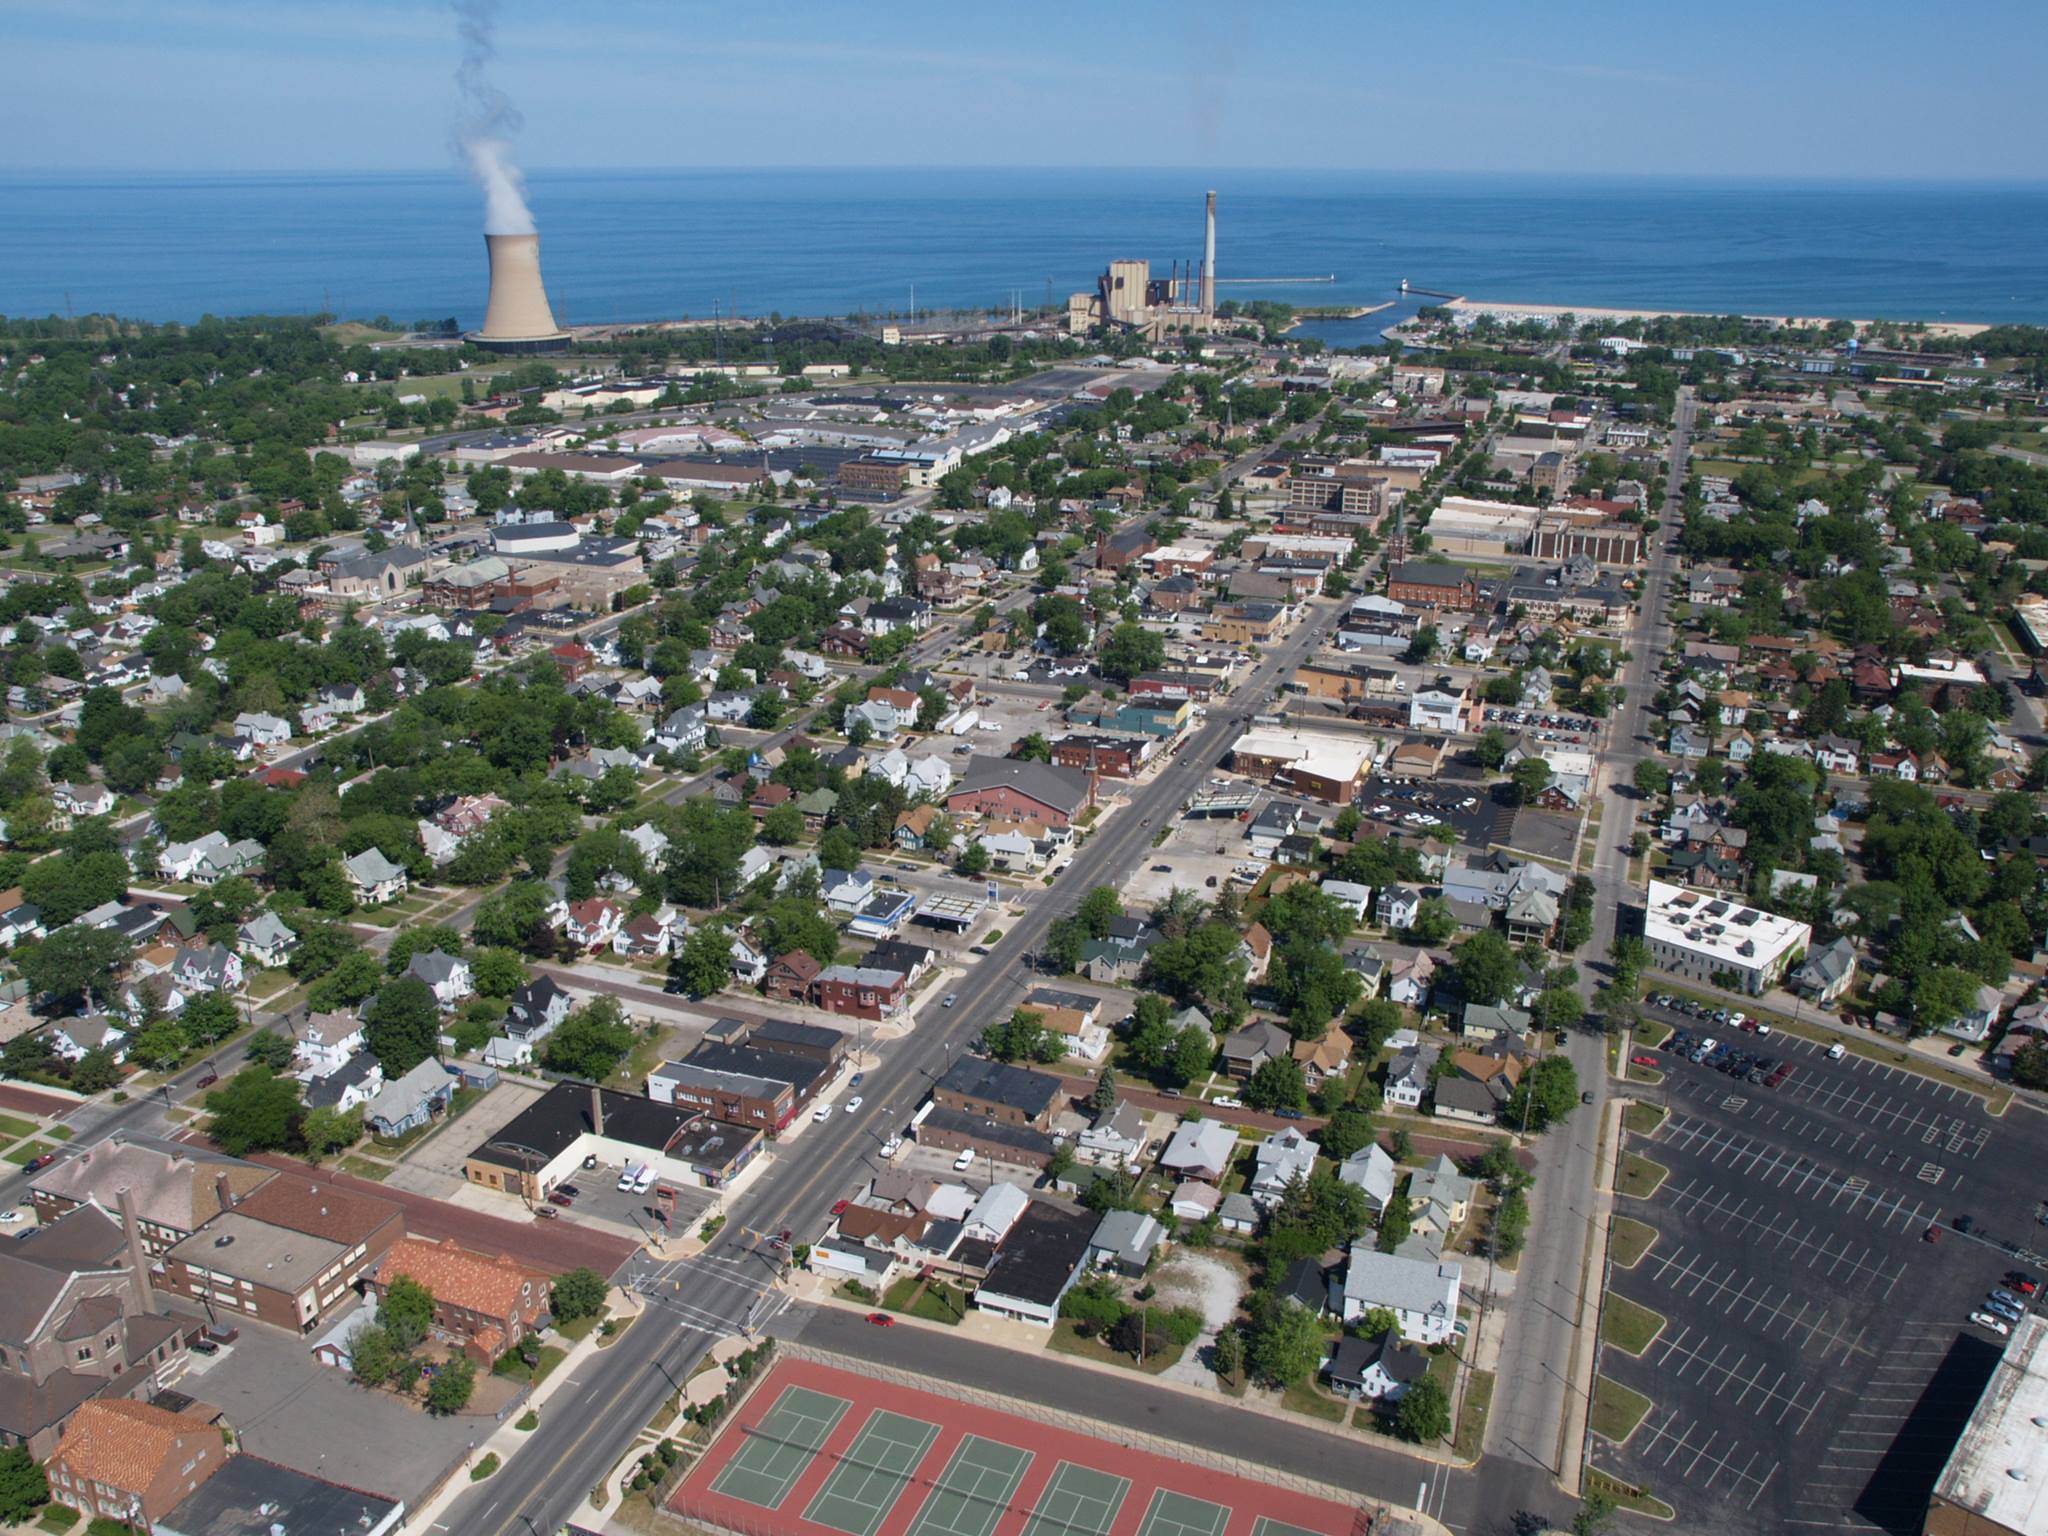 Michigan City: Shining Bright and Becoming a Destination in our Region